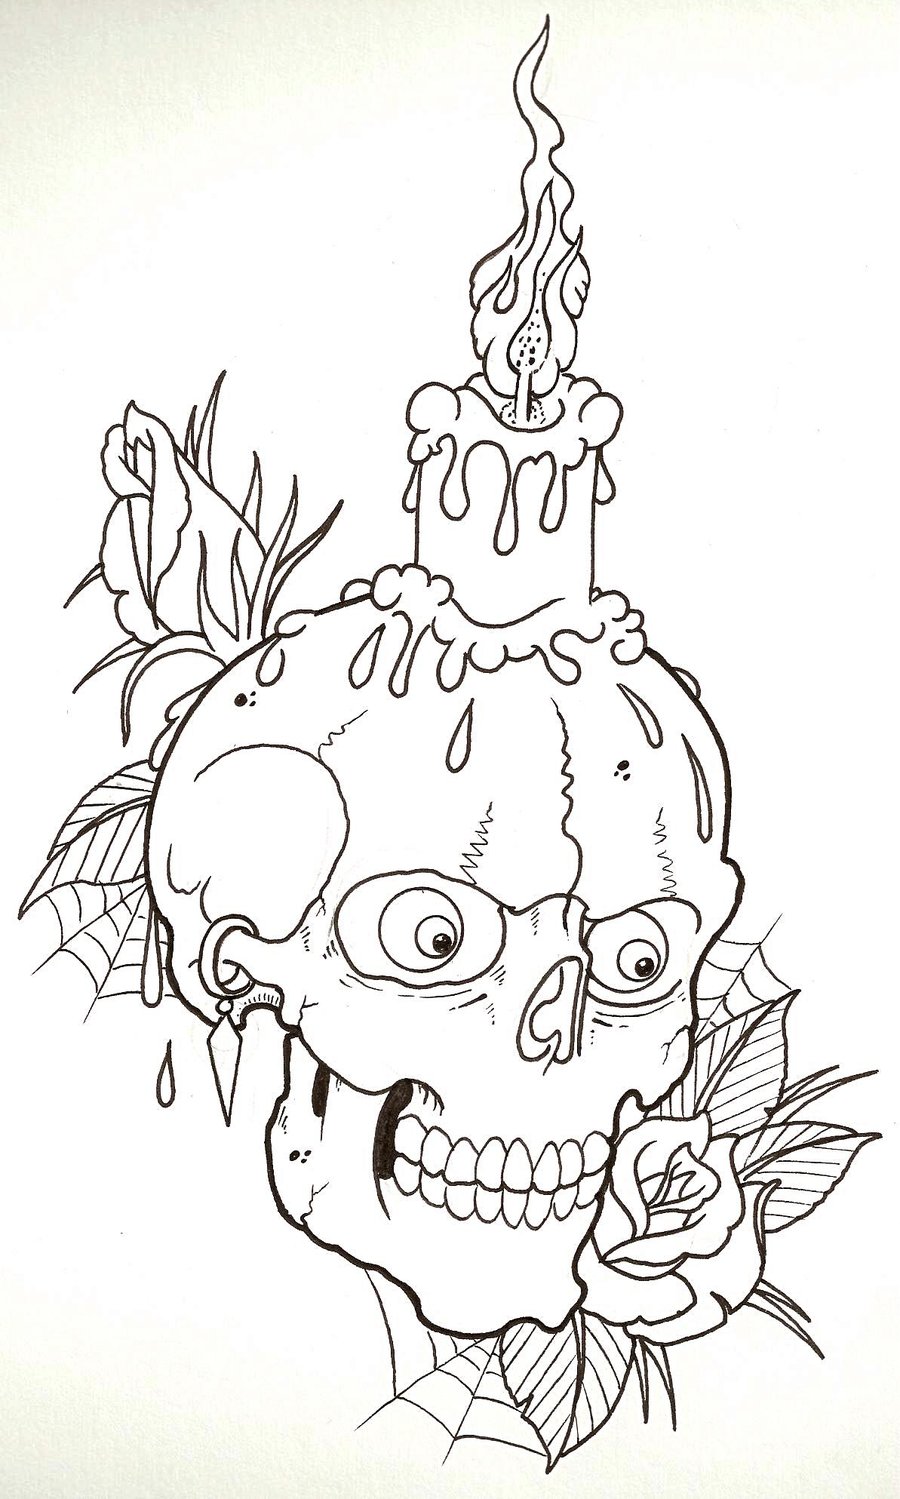 Burning Candle On Skull With Roses Tattoo Stencil By Arnt Erik Hedman